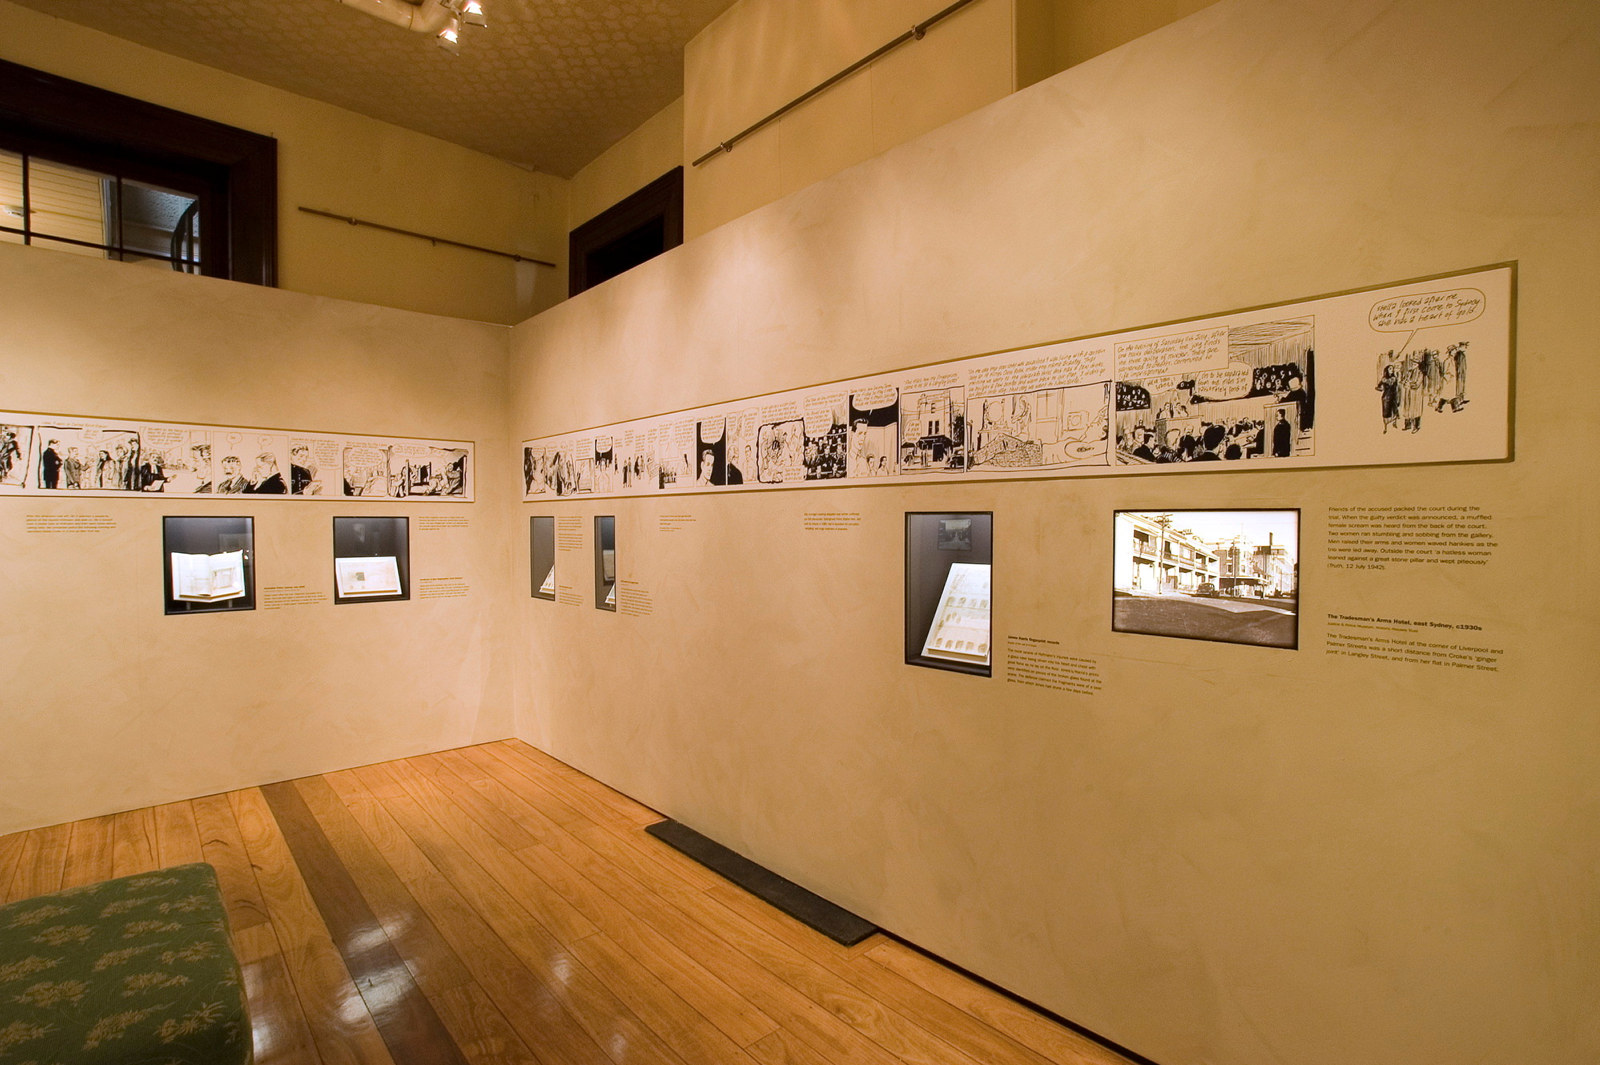 City of shadows installation view